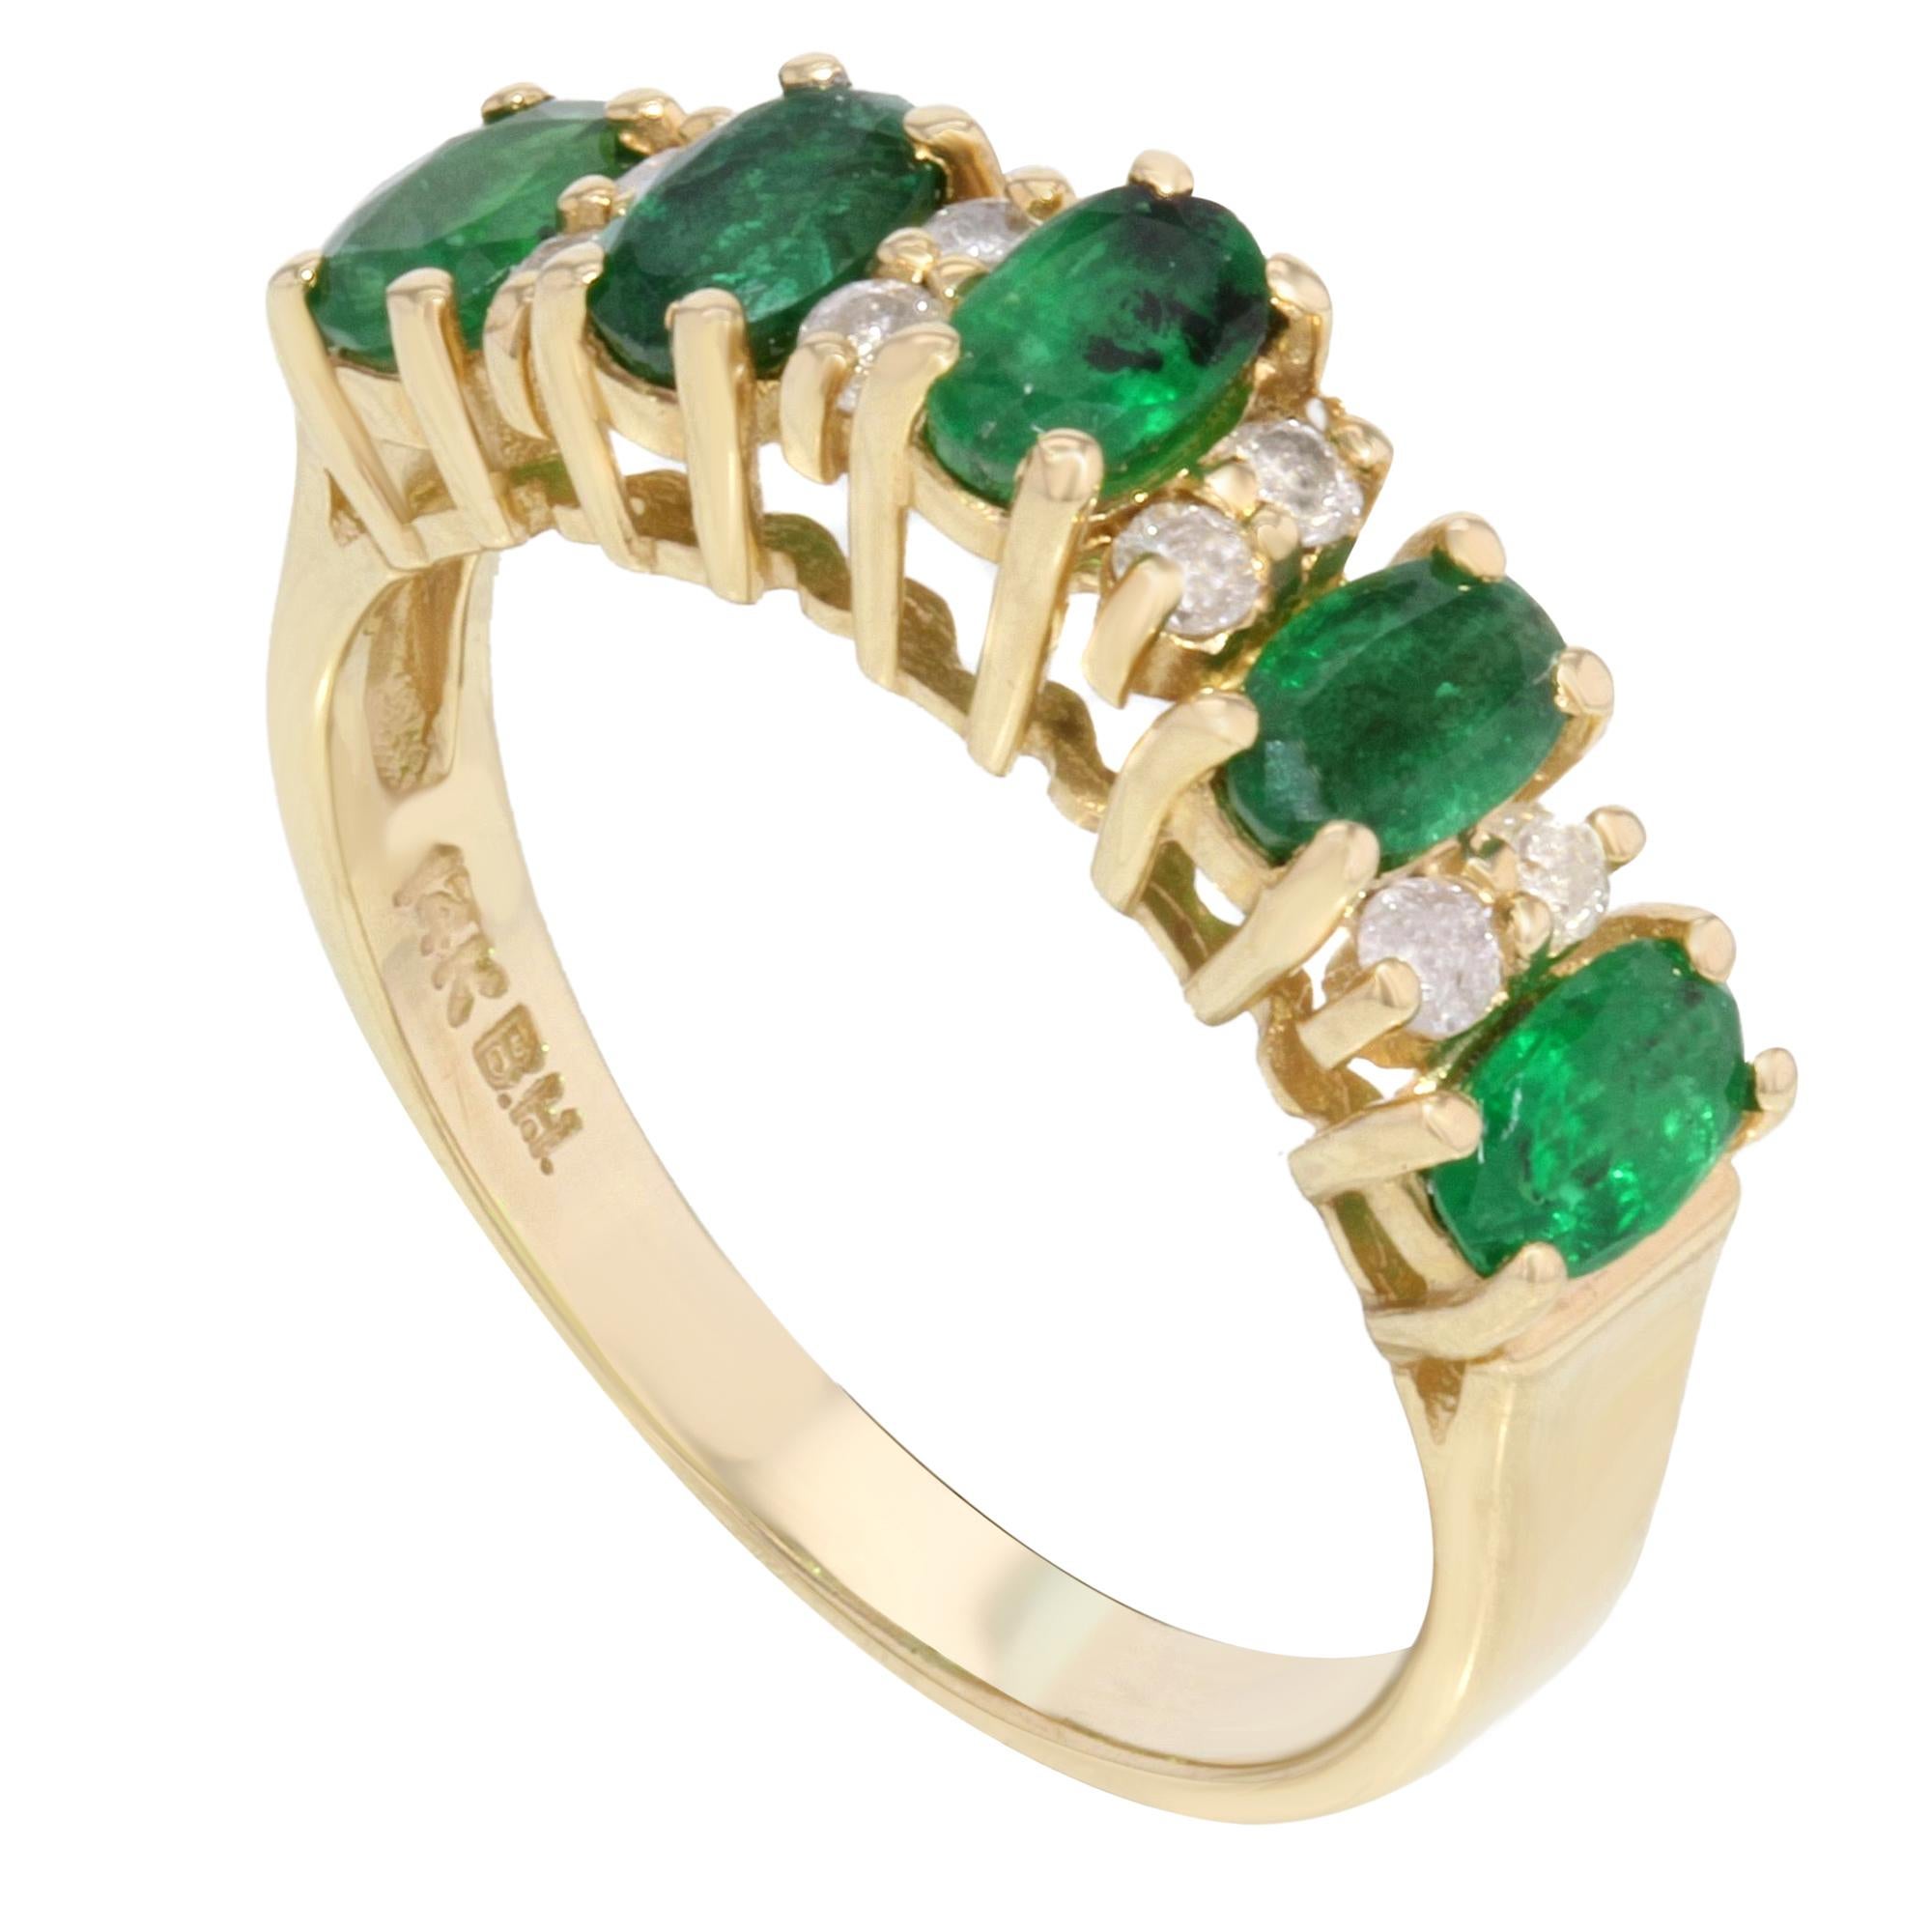 This ring is made of 14K yellow gold and encrusted with approximately 0.12 cttw diamonds and 1.00 cttw emeralds. 

Size of the ring is 6.5. 
Total weight is 3 g. 

The ring comes with a gift box and an appraisal card.